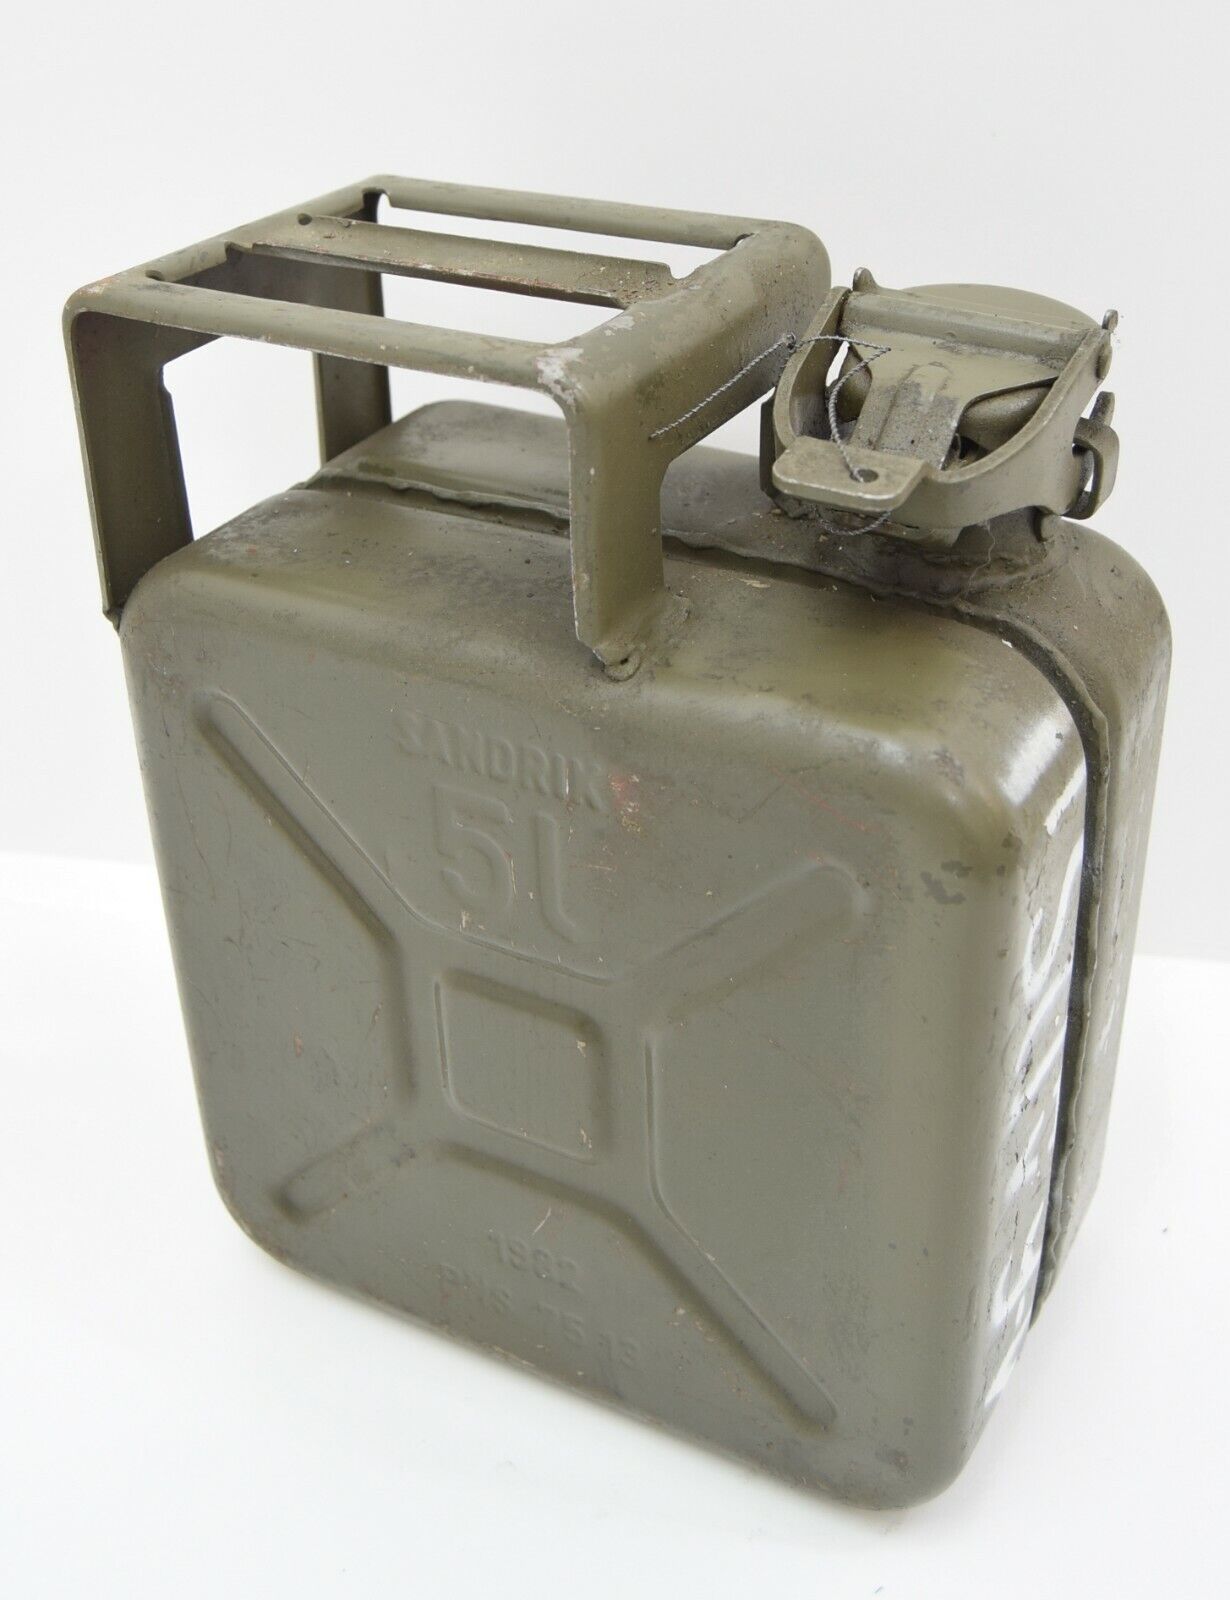 Original German Army 5 Litre Fuel 5L Can SANDRIK Military Petrol Can Rare Issue 